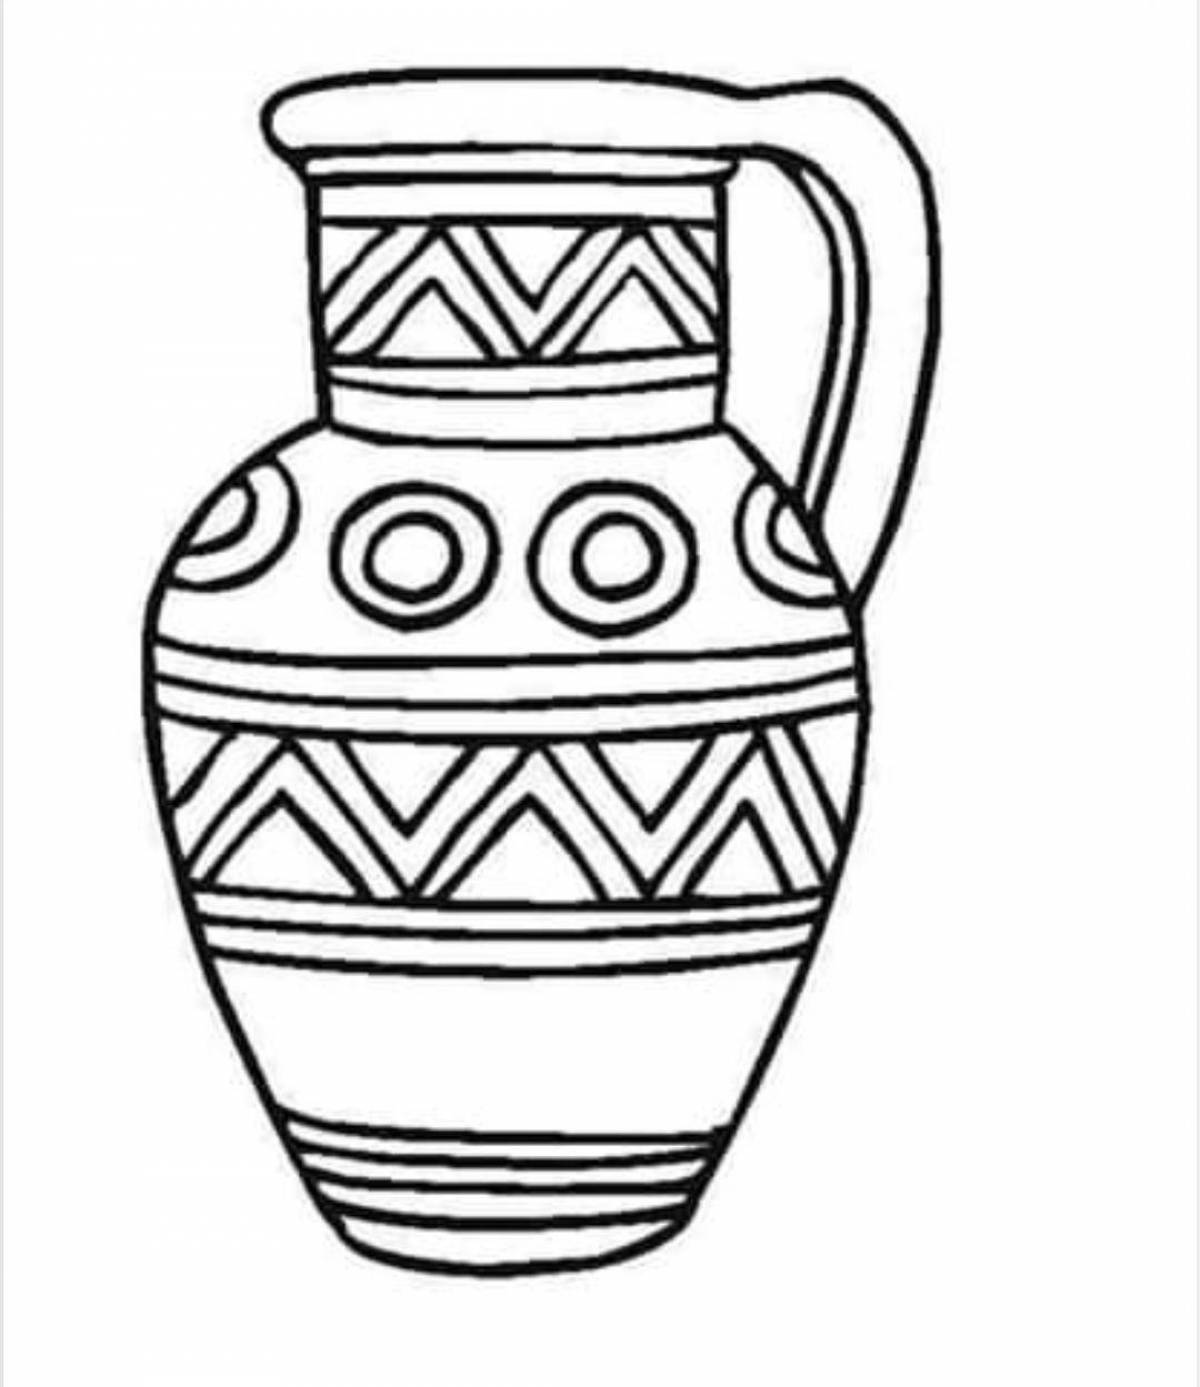 Coloring book for children with a sparkling jug